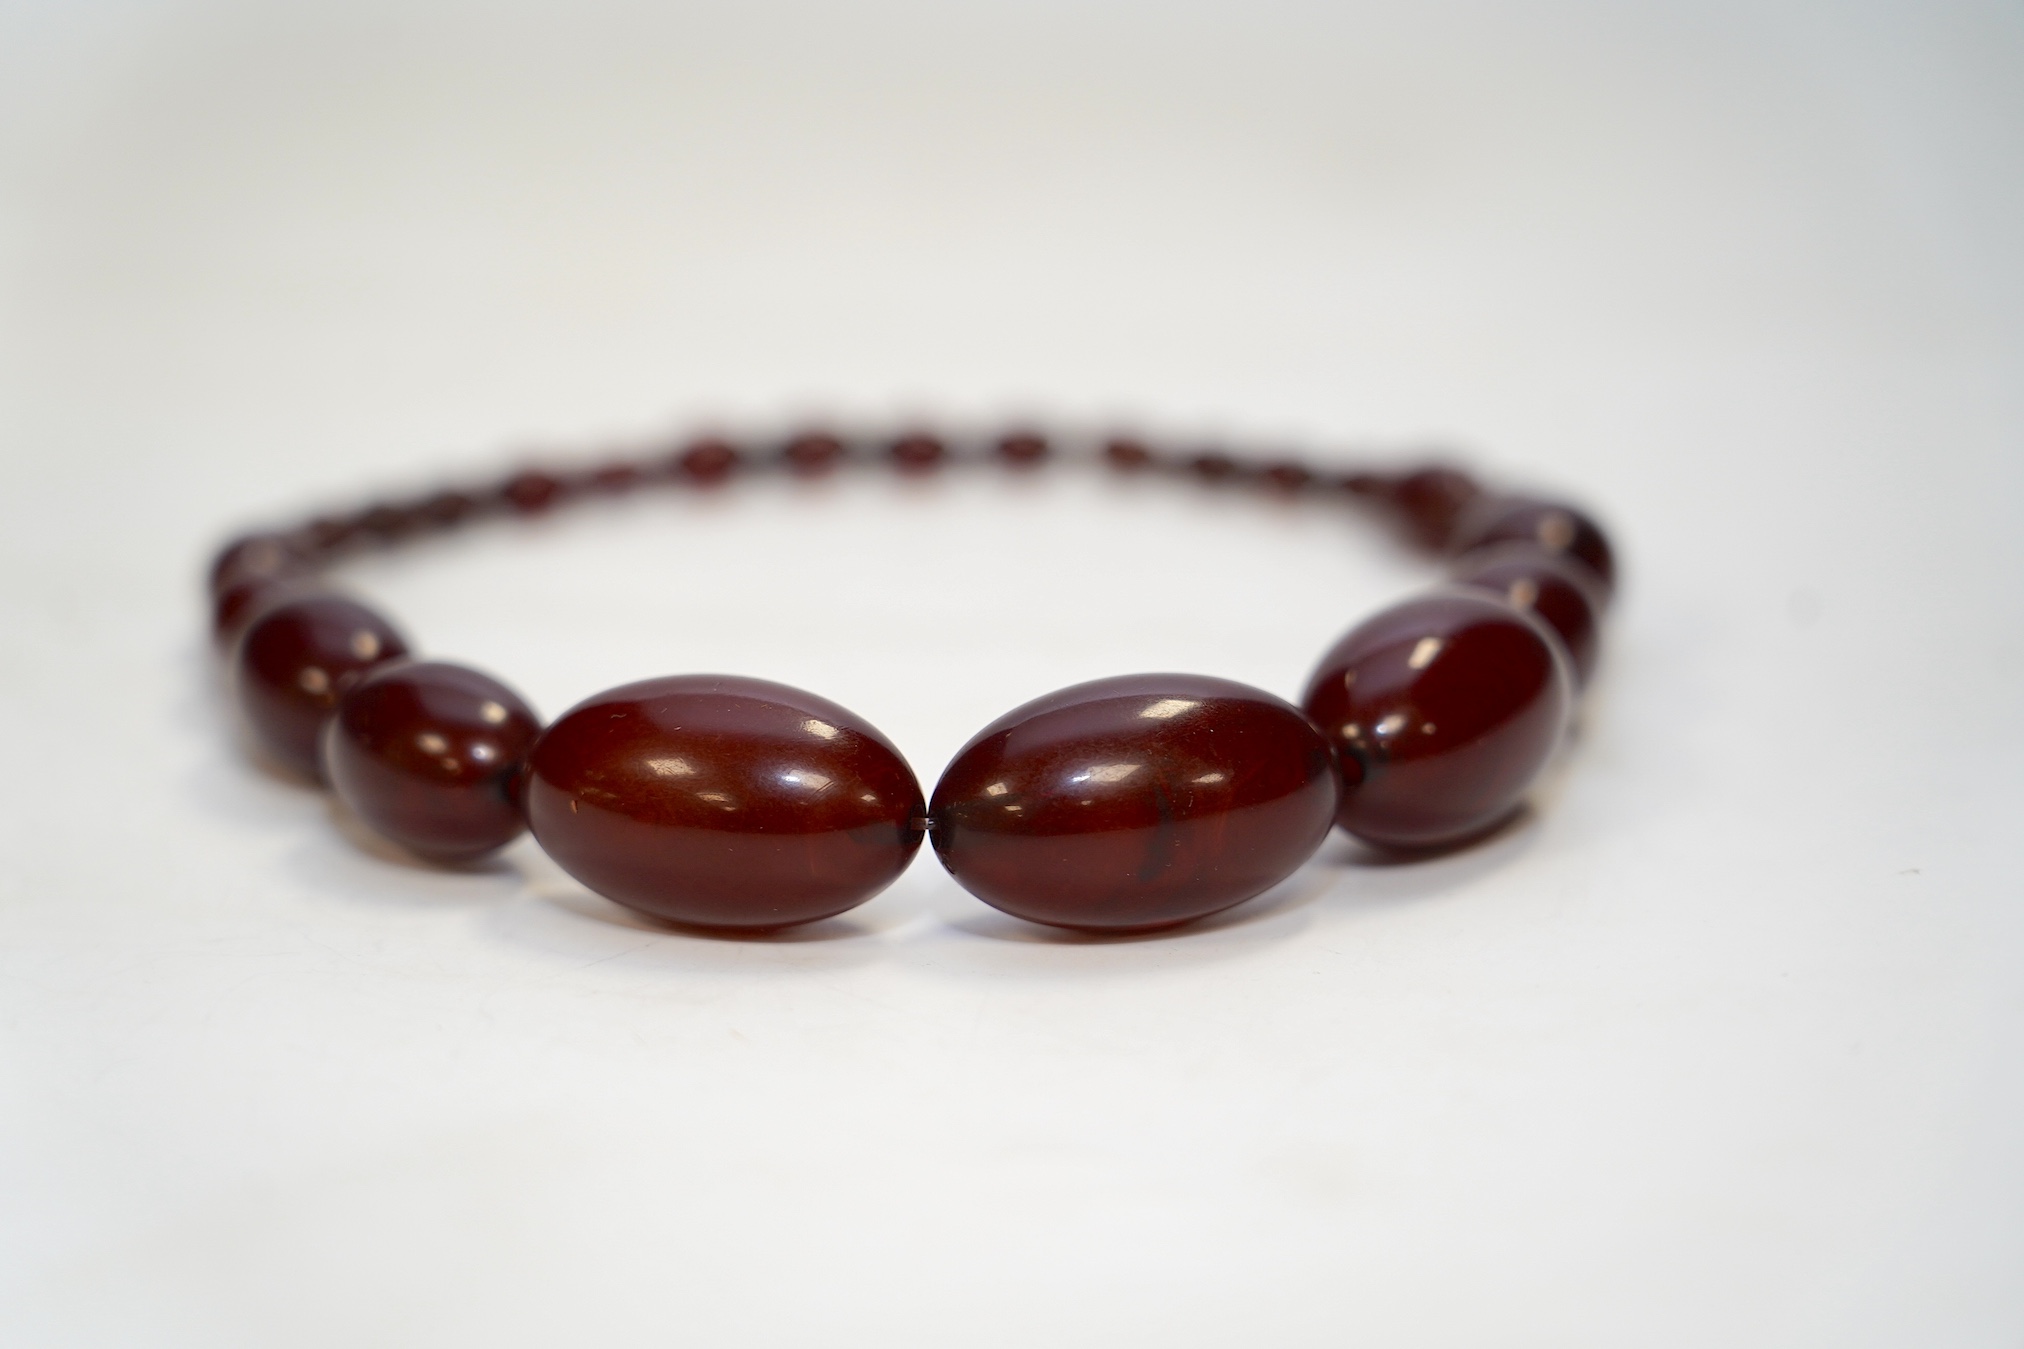 A single strand graduated simulated cherry amber bead necklace, 38cm, gross weight 65 grams. Condition - fair.